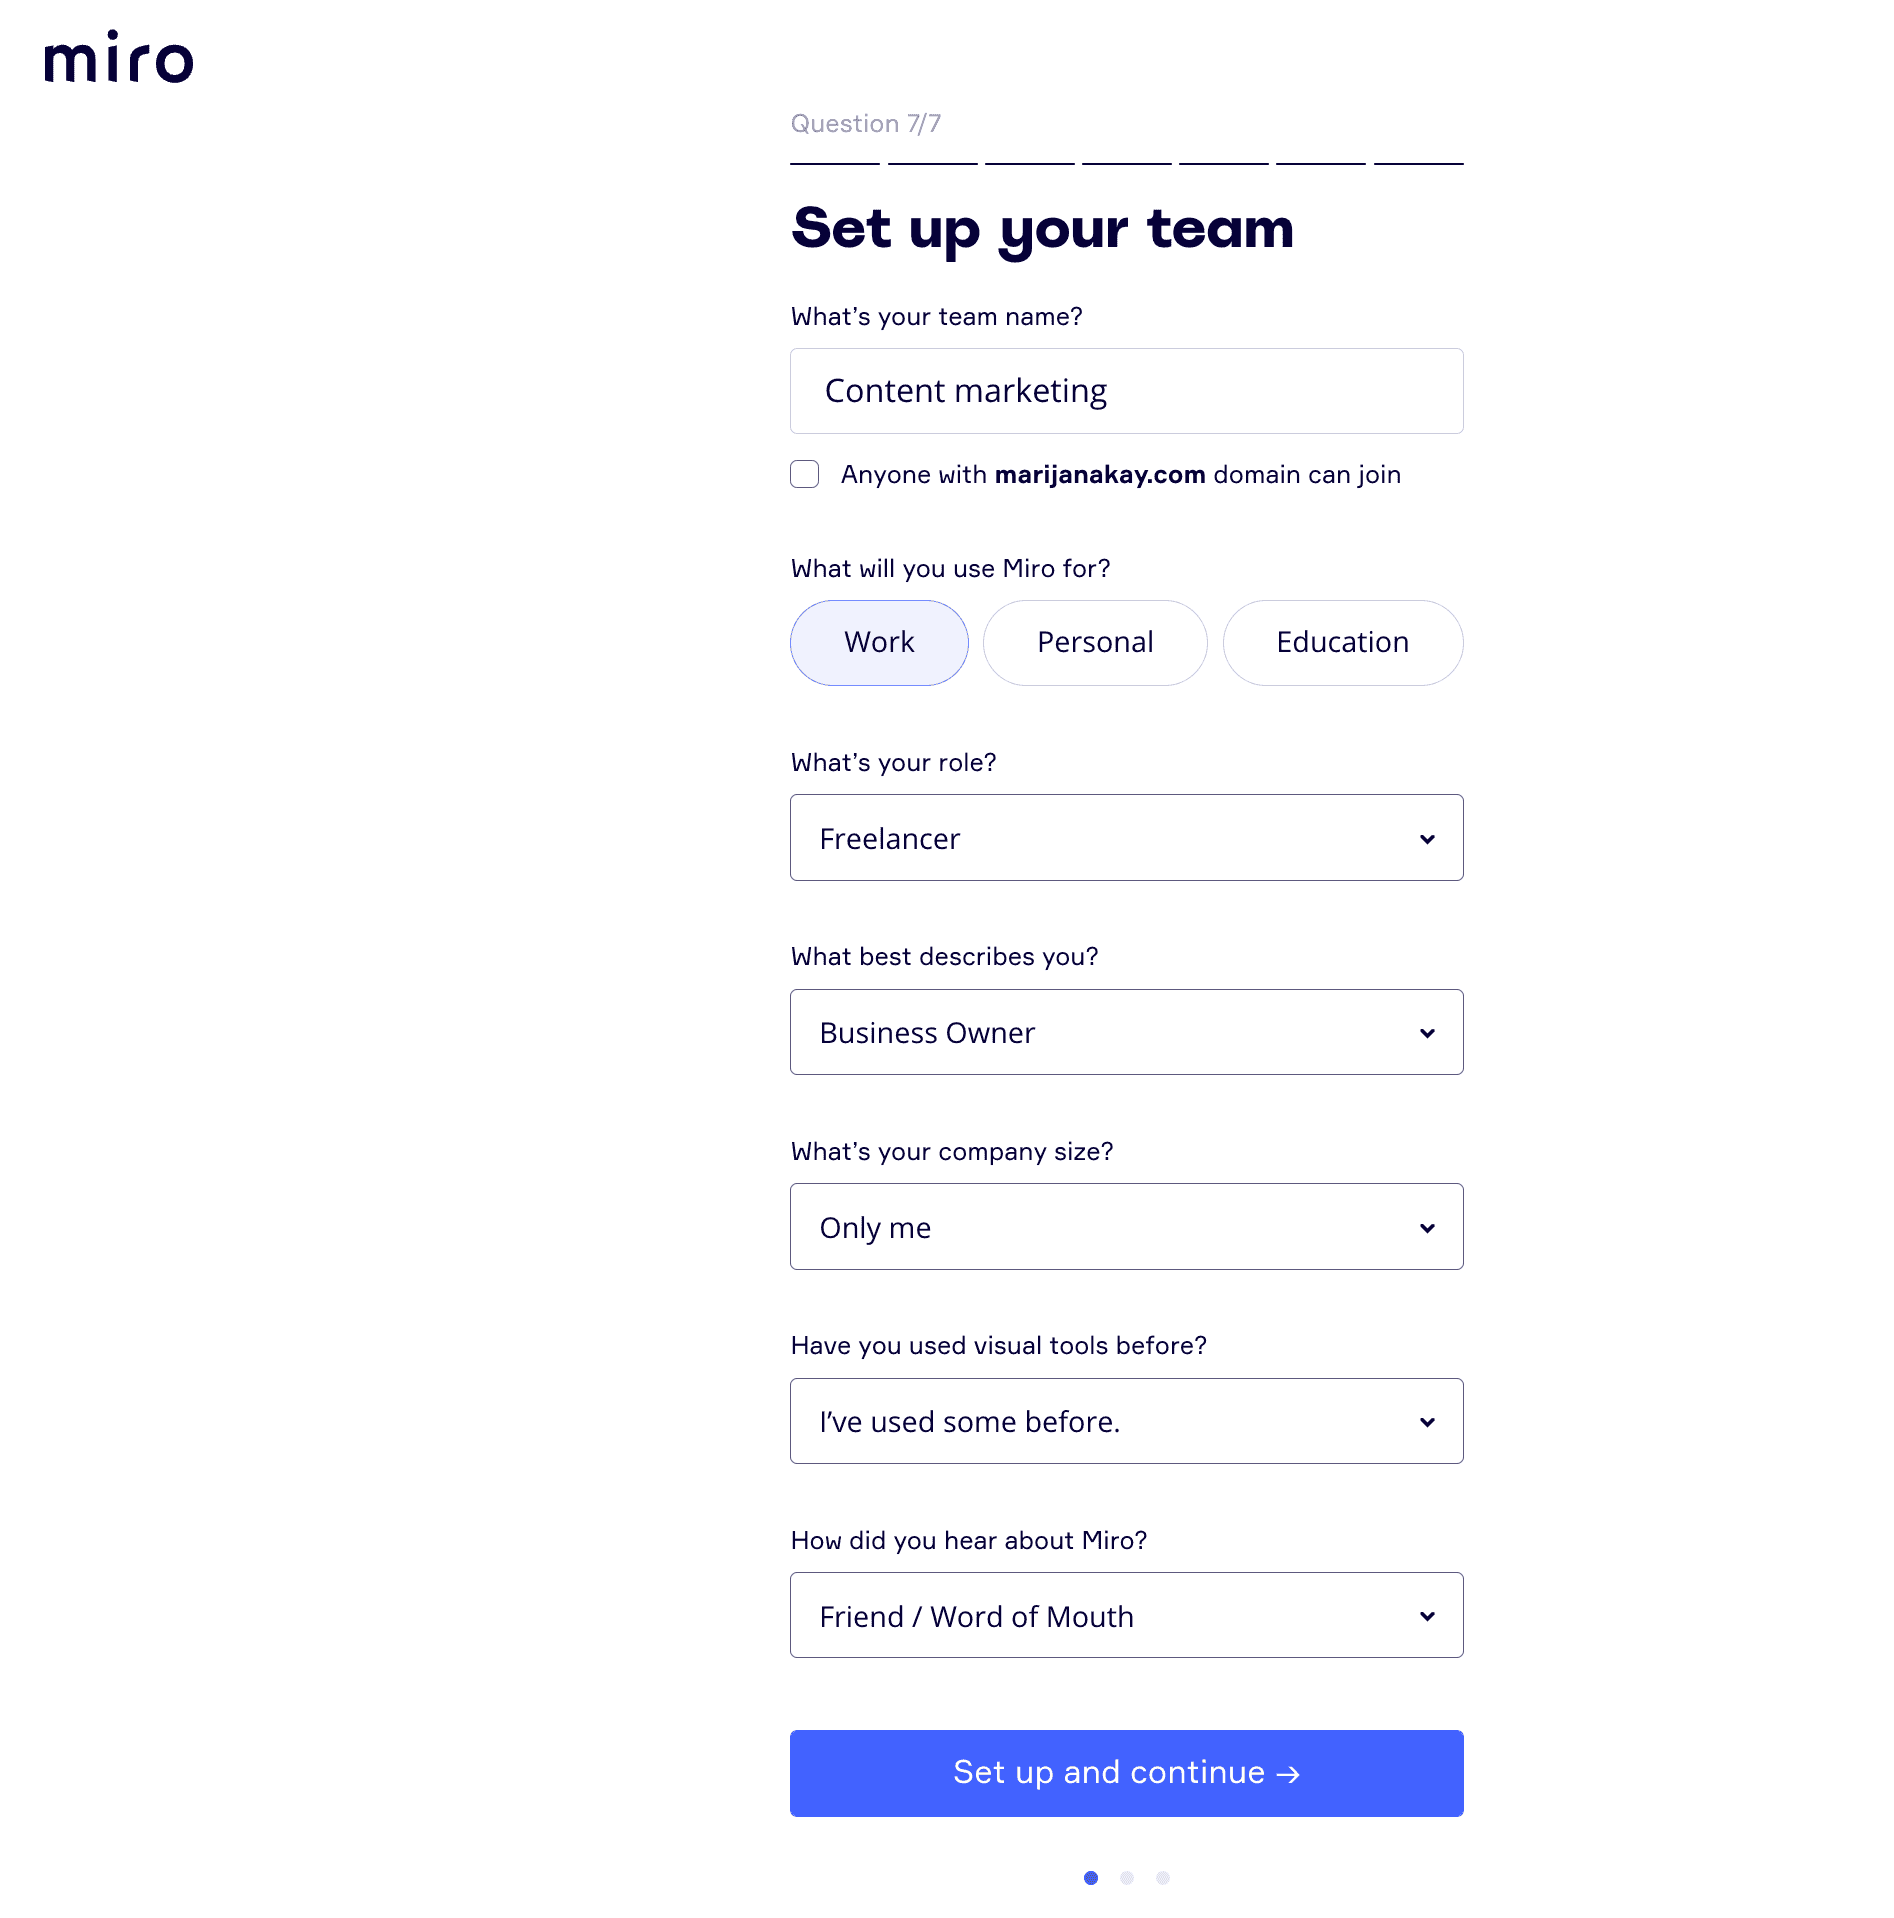 A screenshot from the Miro website, questions asked customers during their onboarding experience.